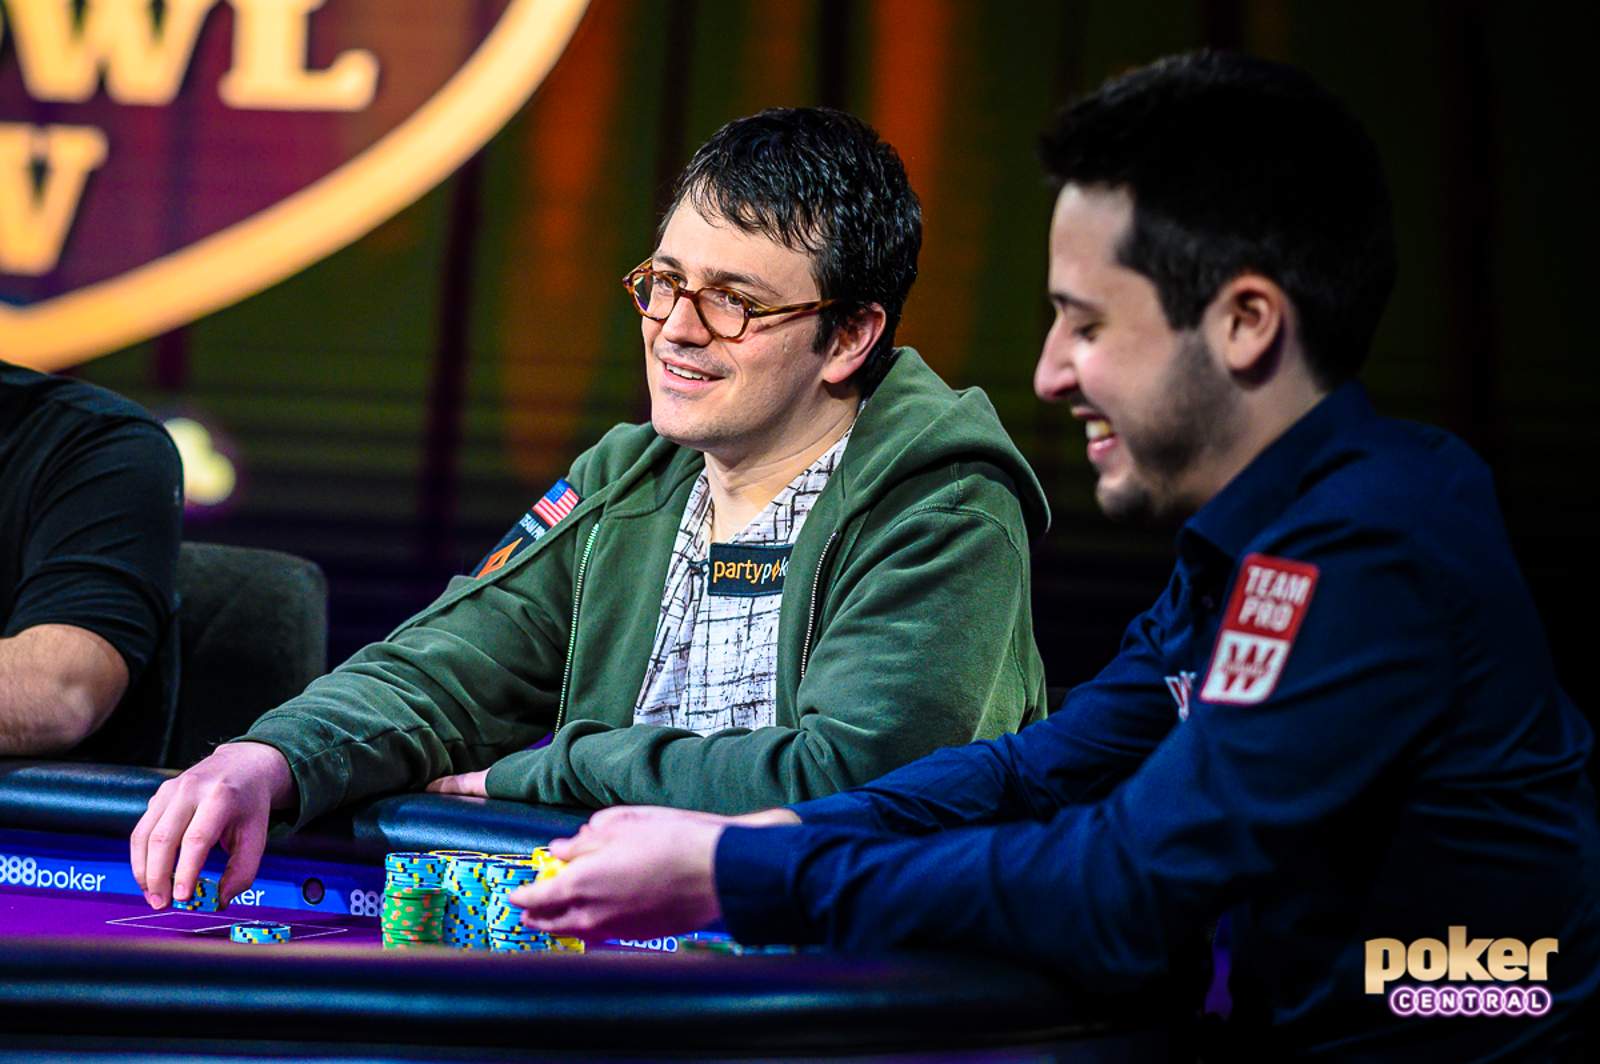 Isaac Haxton Leads Super High Roller Bowl V Final Table; $3.672 Million for the Winner